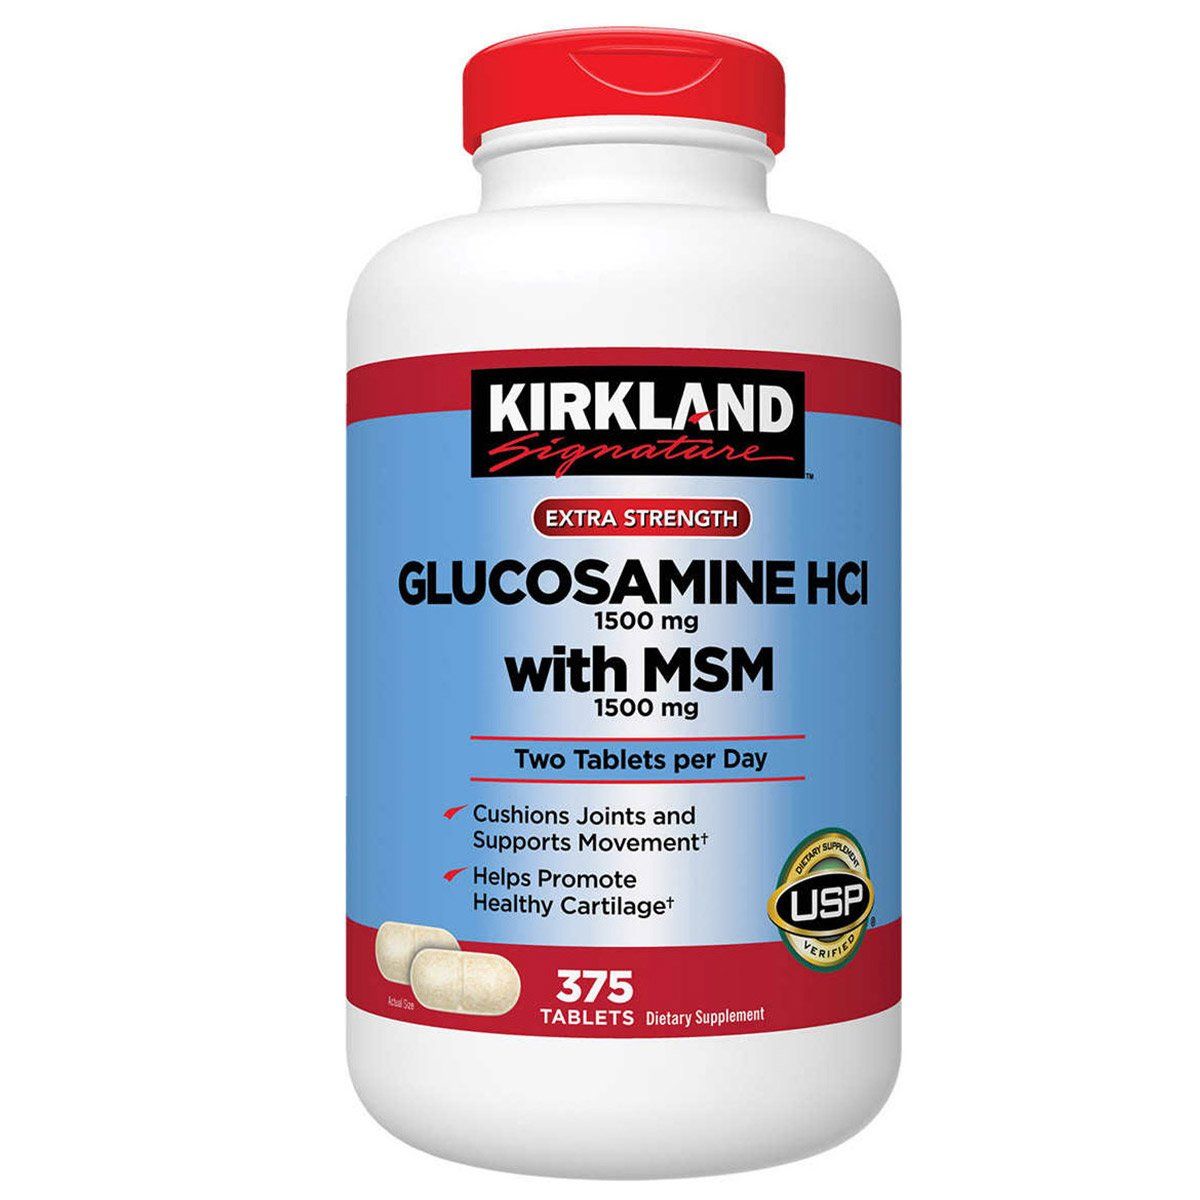  Glucosamine HCL 1500mg With MSM 1500mg 375 Tablets 